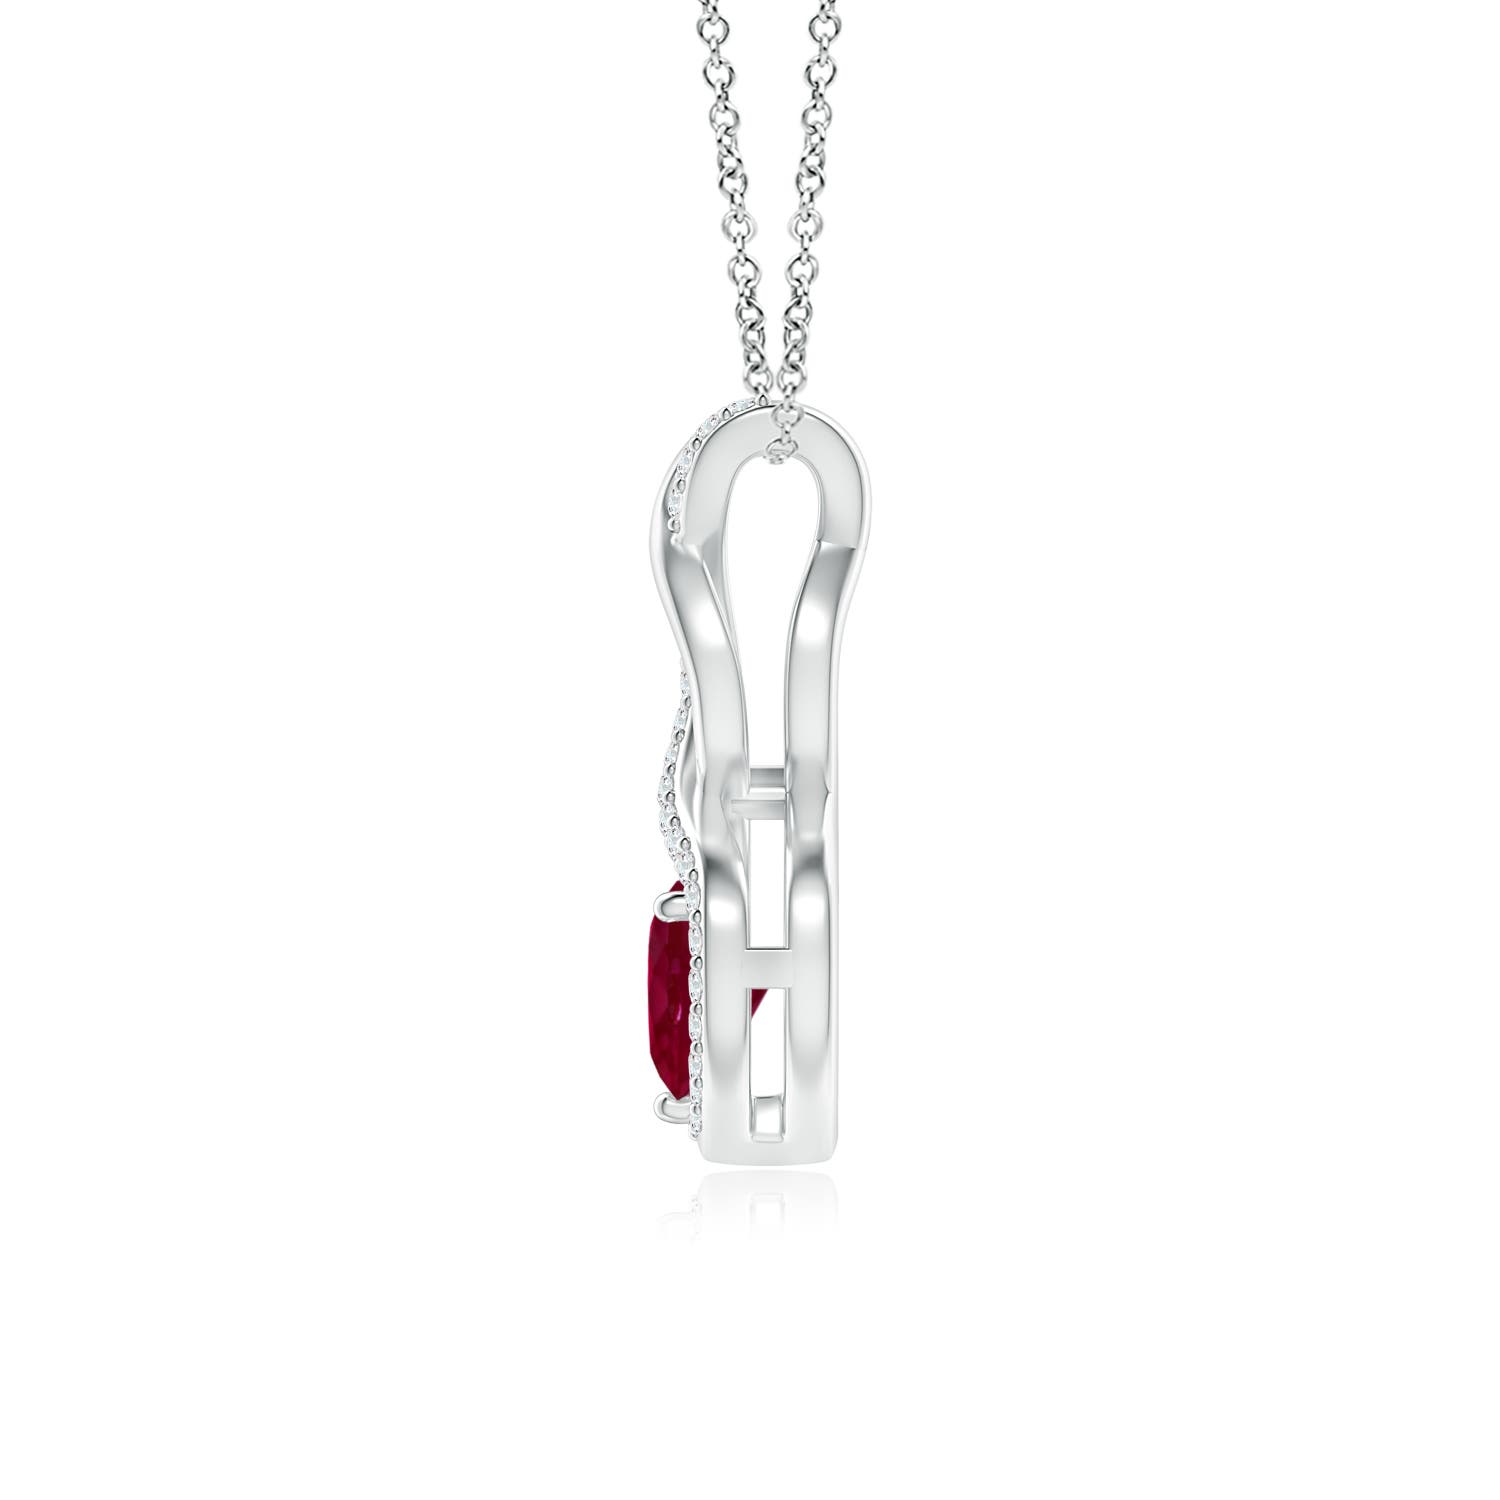 A - Ruby / 0.61 CT / 14 KT White Gold